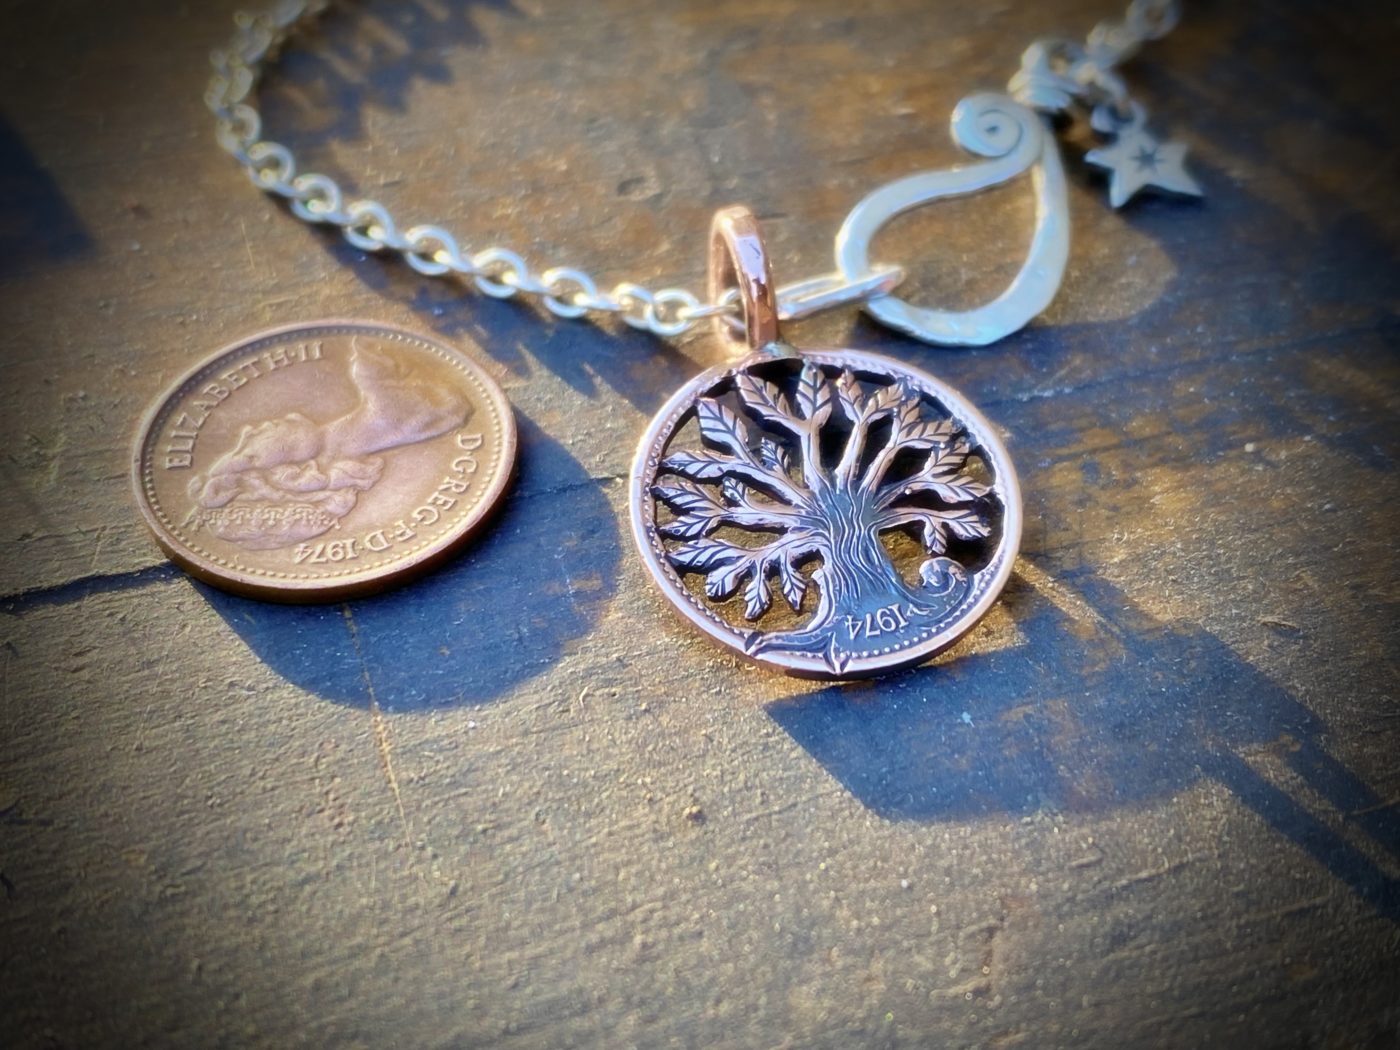 50th birthday gift tree of life made from repurposed half penny coin